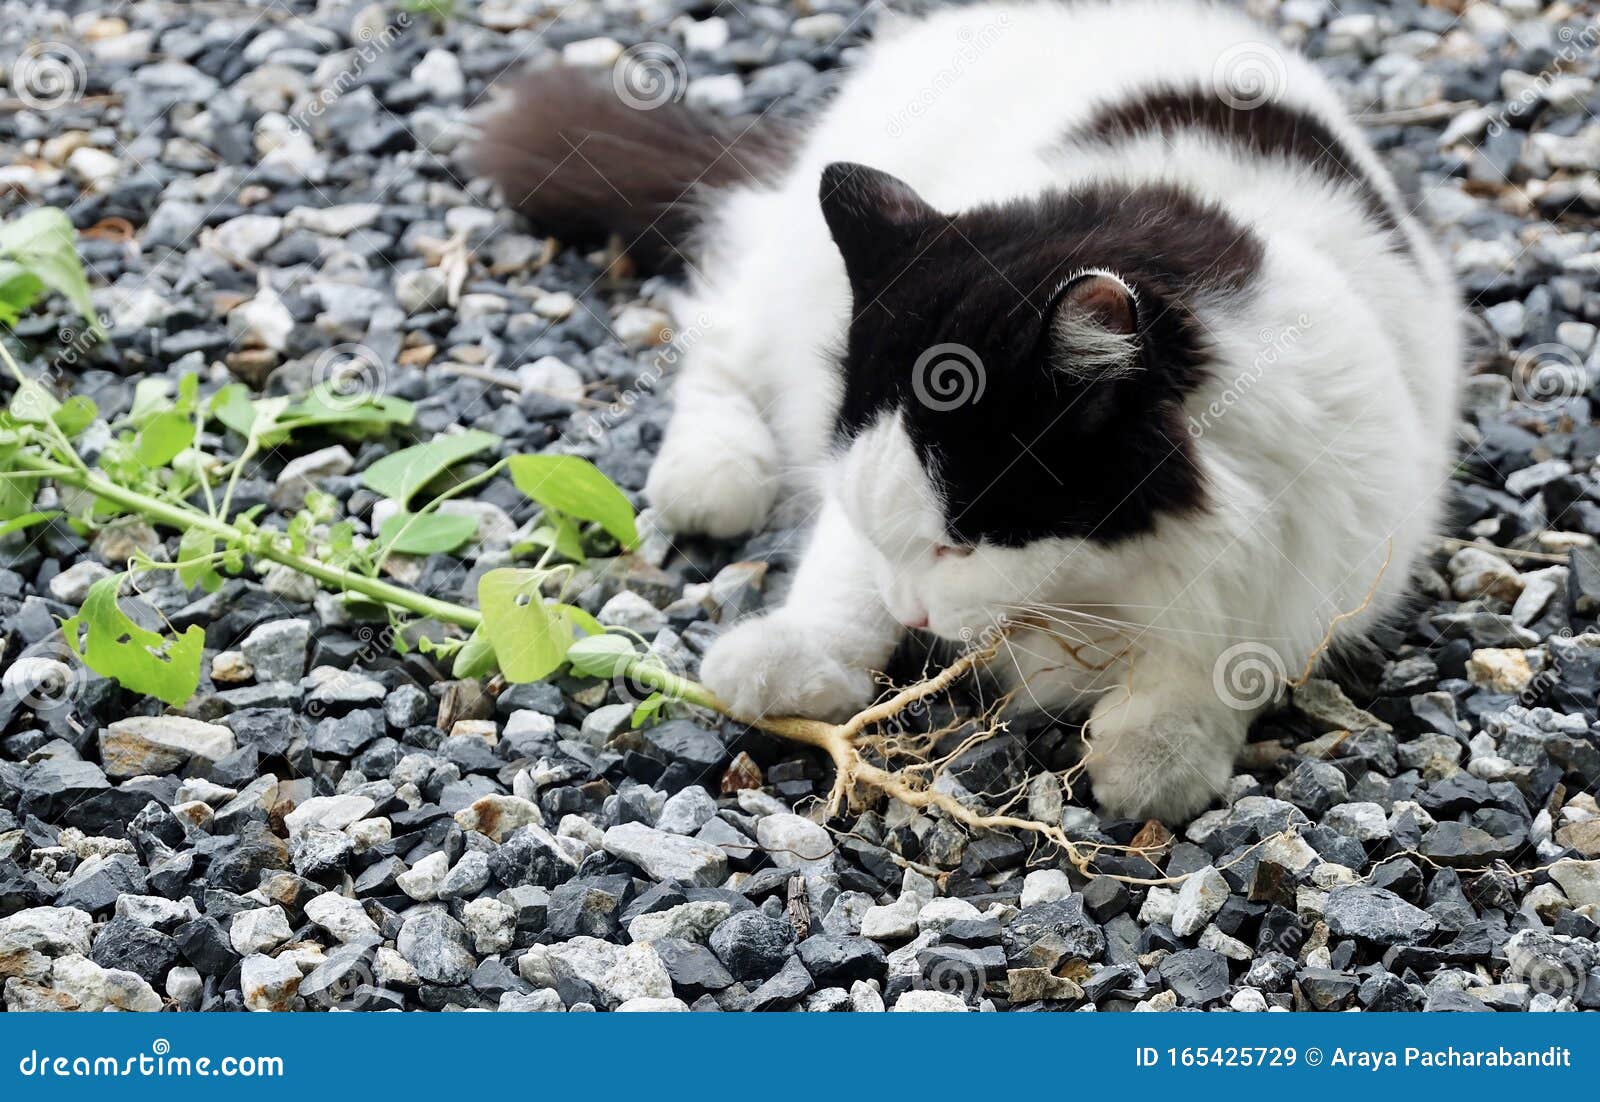 Domestic Cat Eating Indian Acalypha Or Cat Grass Stock Image Image of